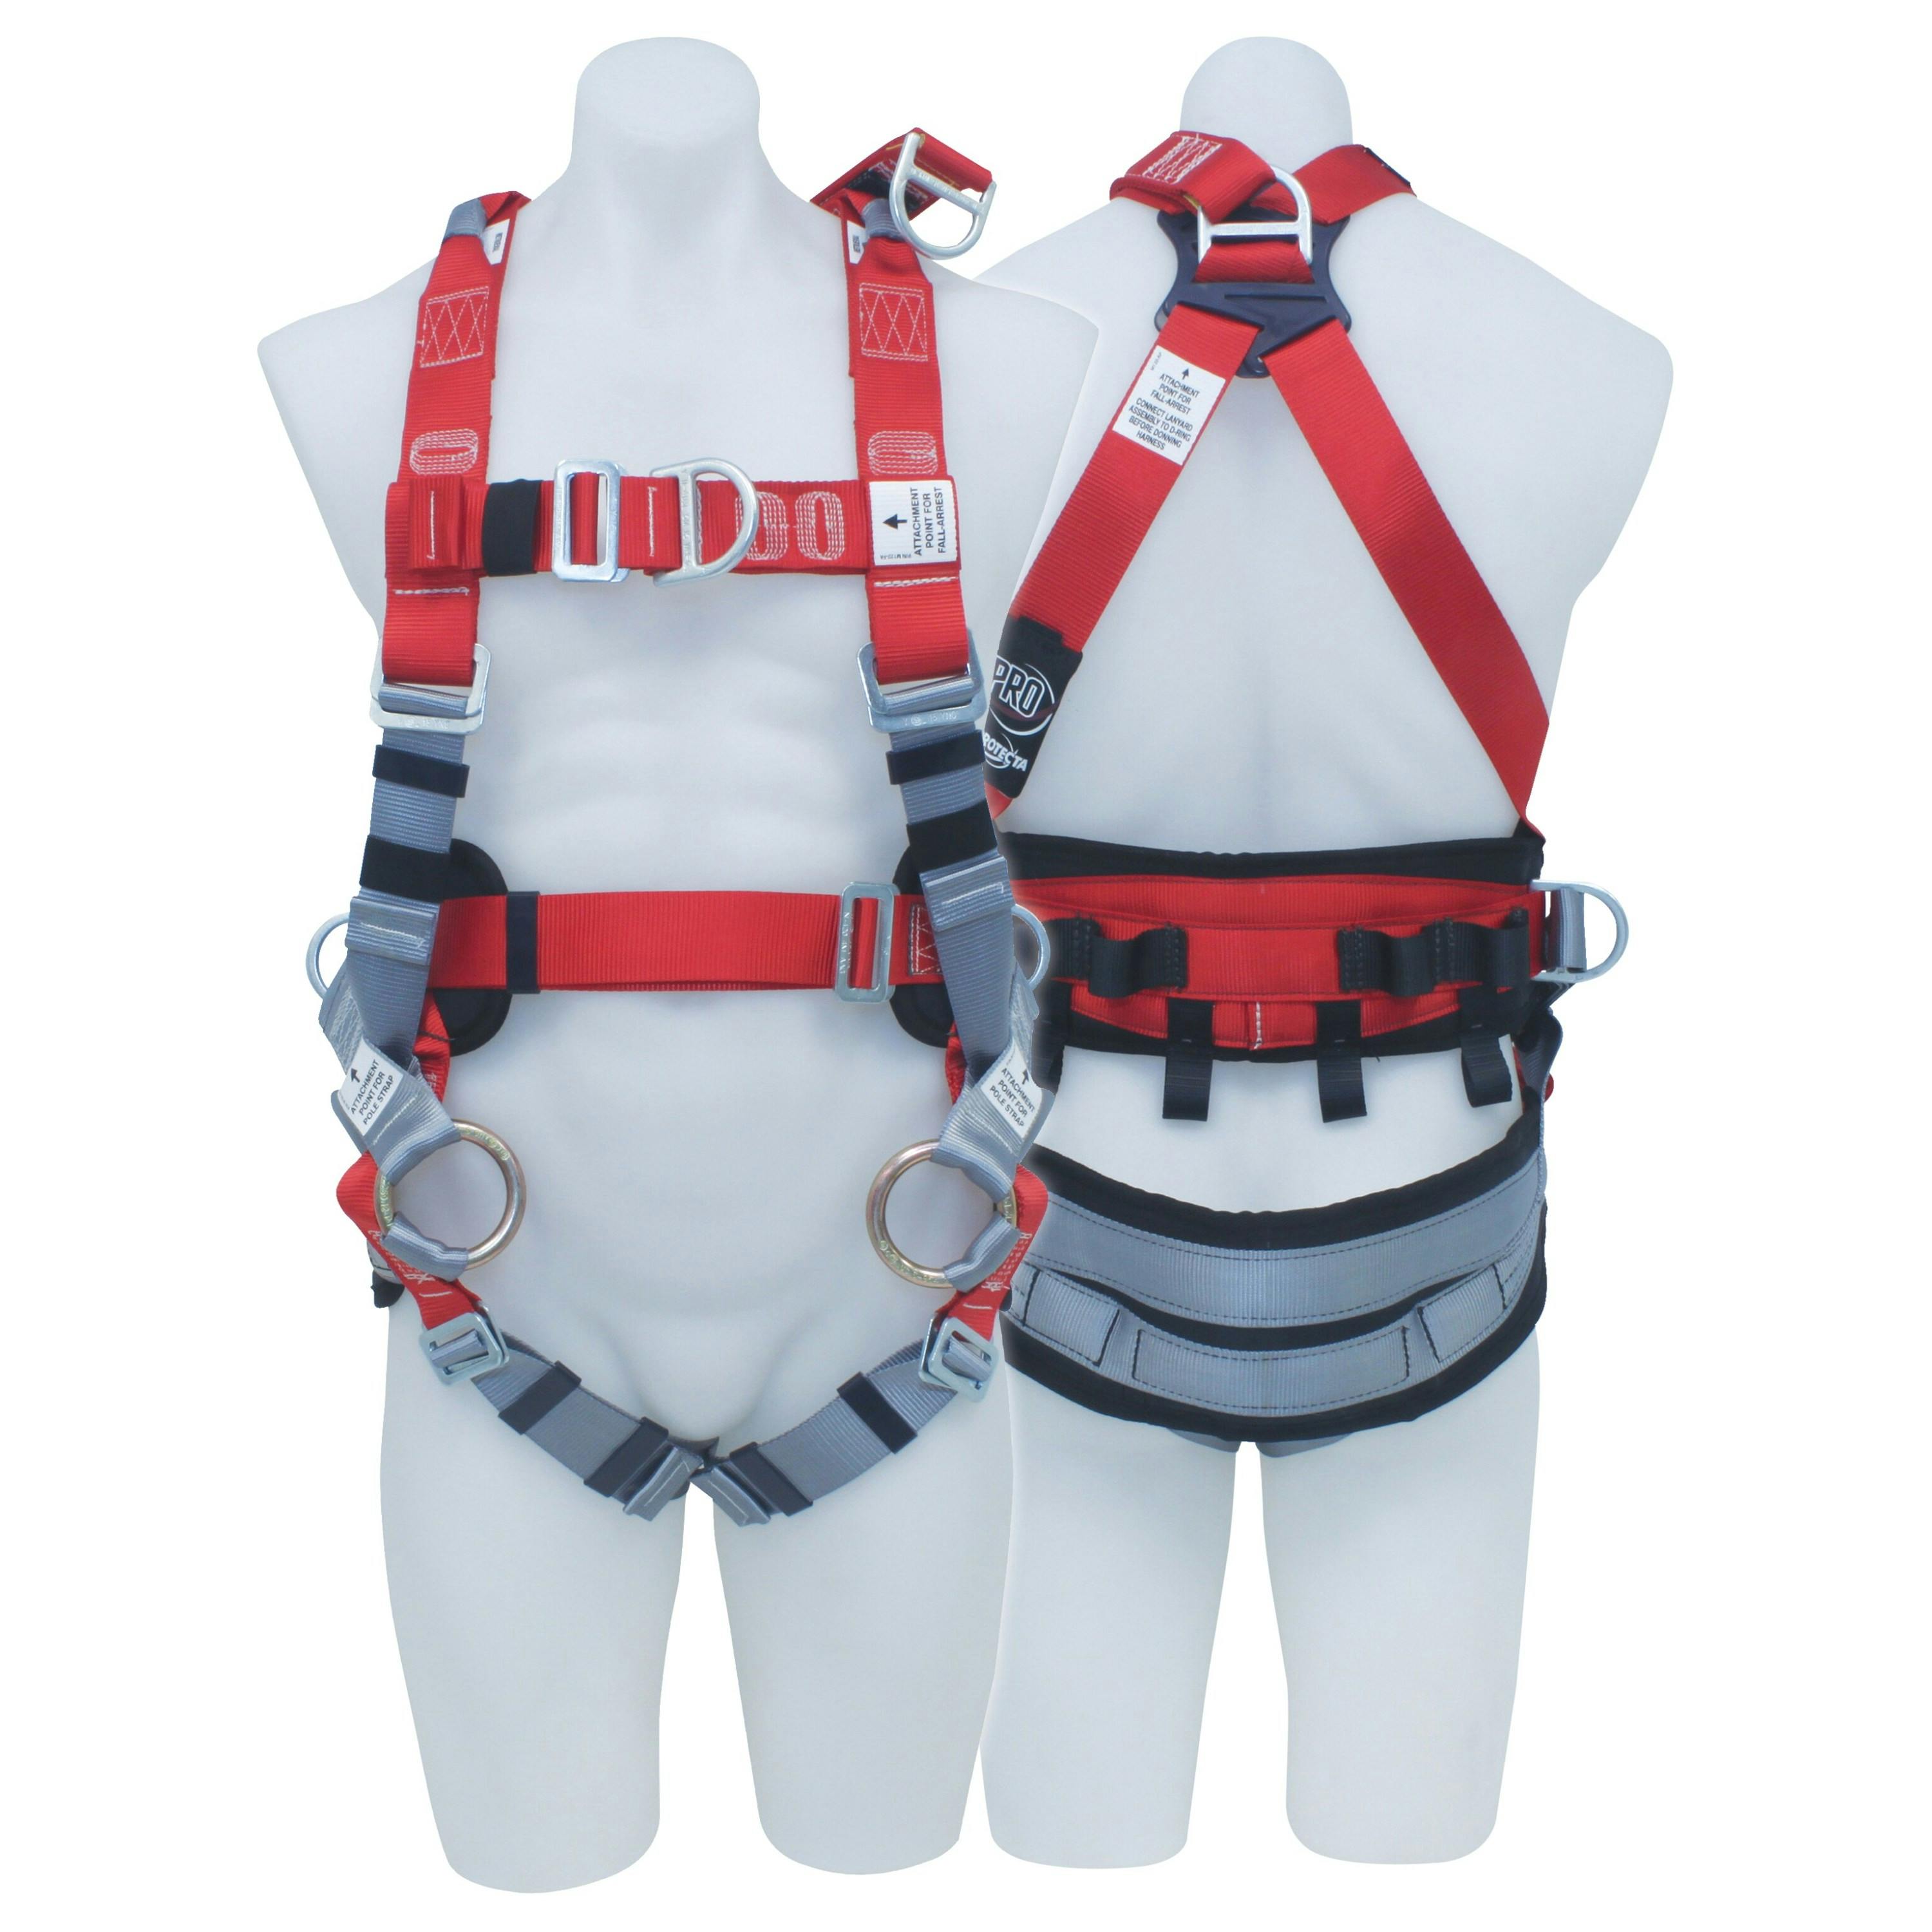 3M™ PROTECTA® PRO Tower Workers Harness AB129-2XL, Red and Grey, Large, 1 EA/Case